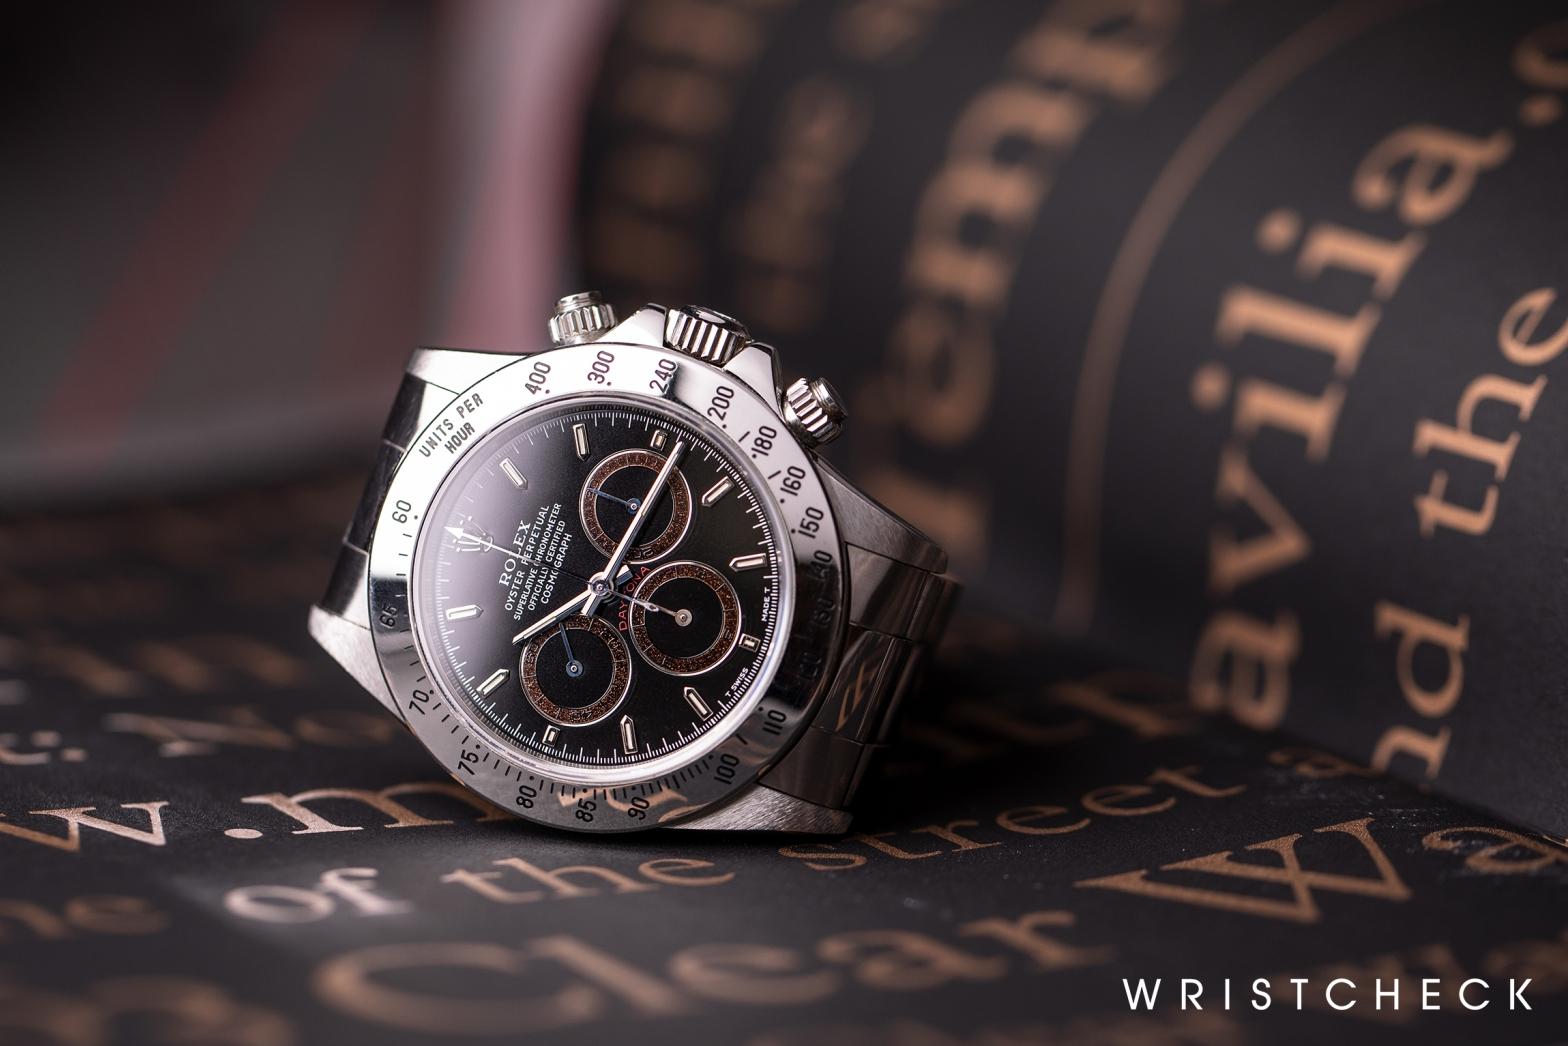 Rolex Cosmograph Daytona Ref. 16520 with 'tropical' registers.